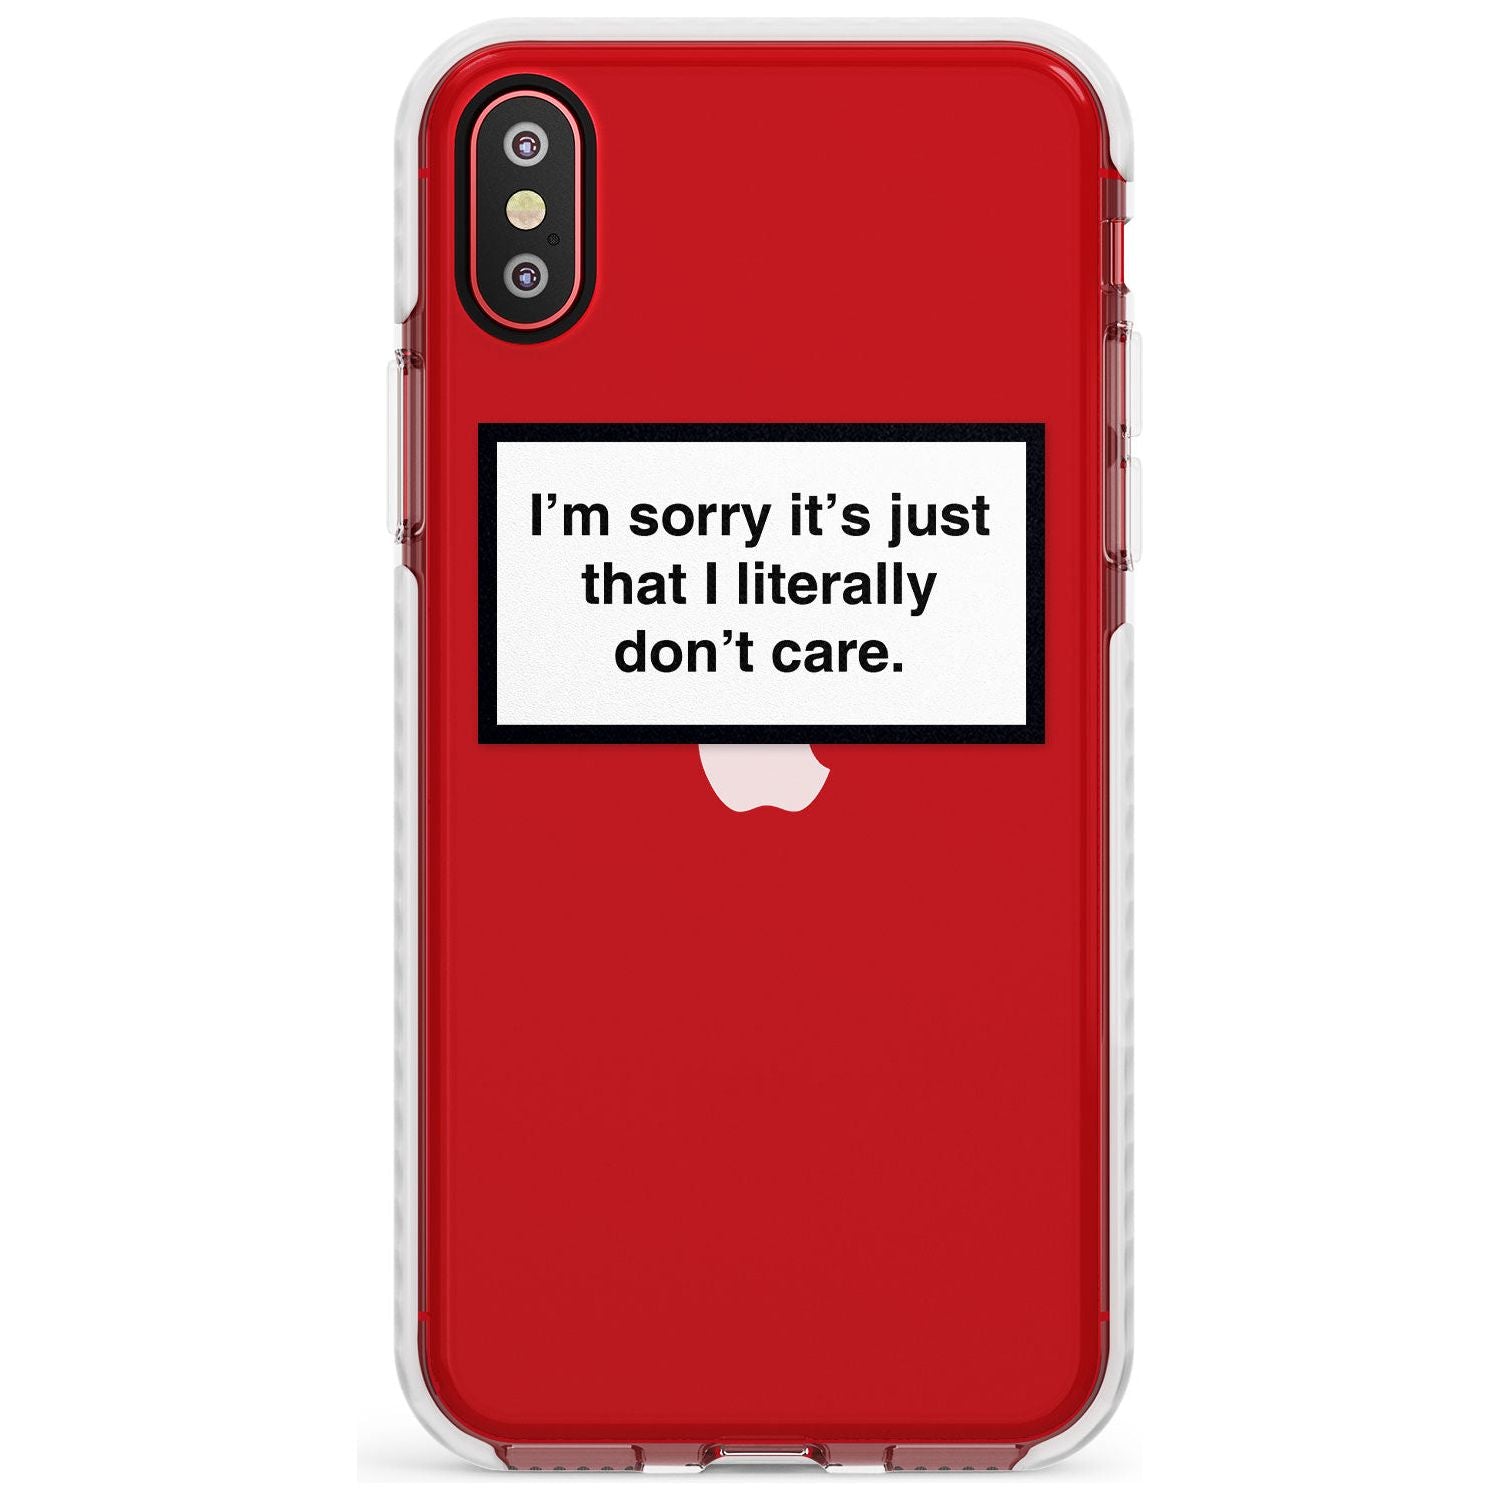 I'm sorry it's just that I literally don't care Slim TPU Phone Case Warehouse X XS Max XR